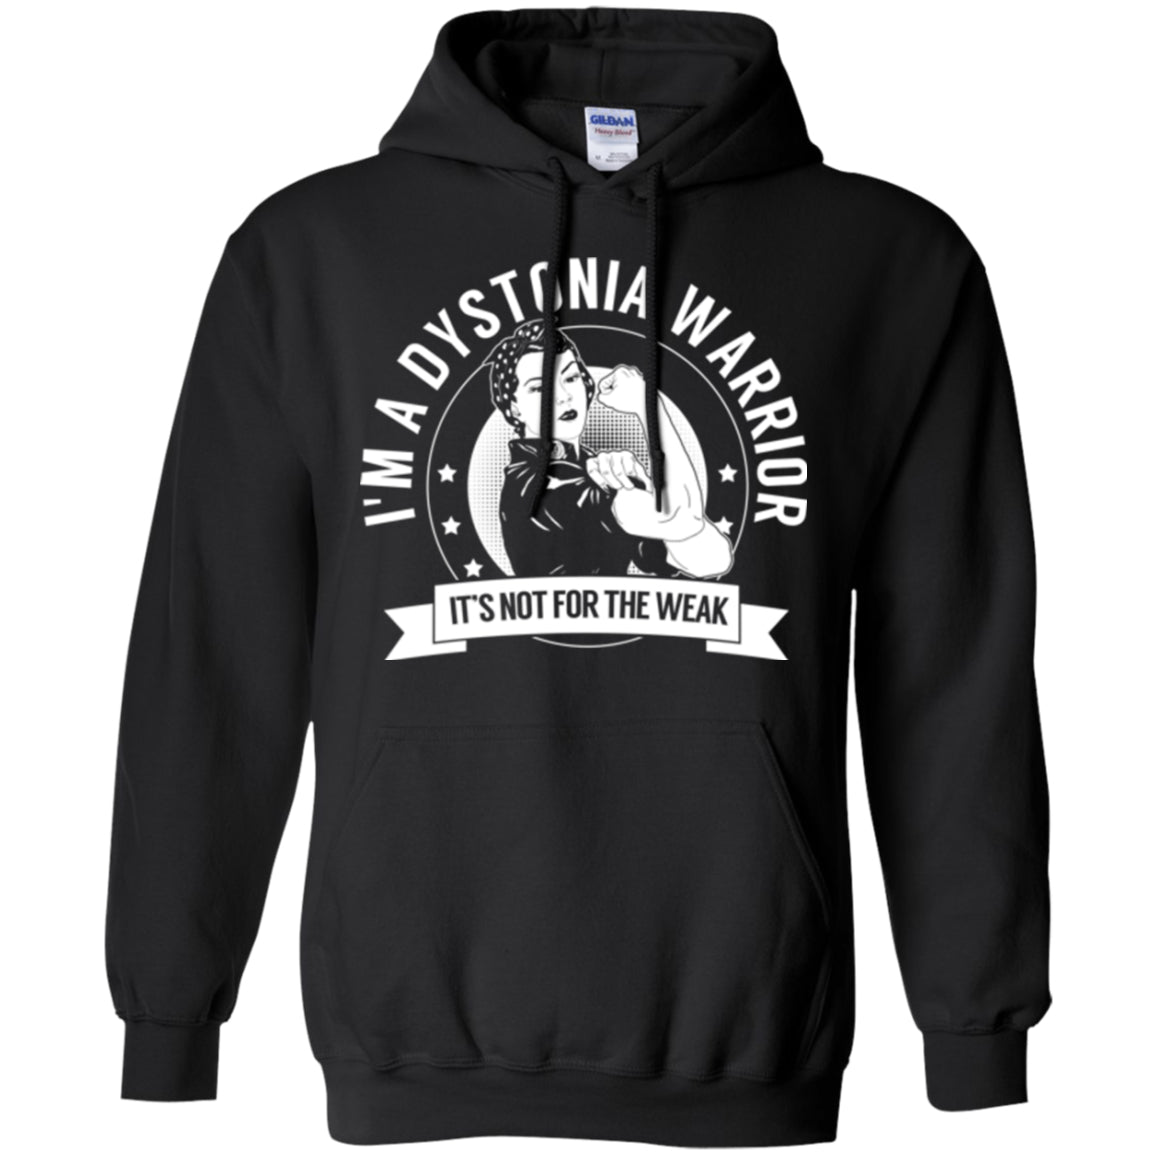 Dystonia Warrior Not For The Weak Pullover Hoodie 8 oz. - The Unchargeables